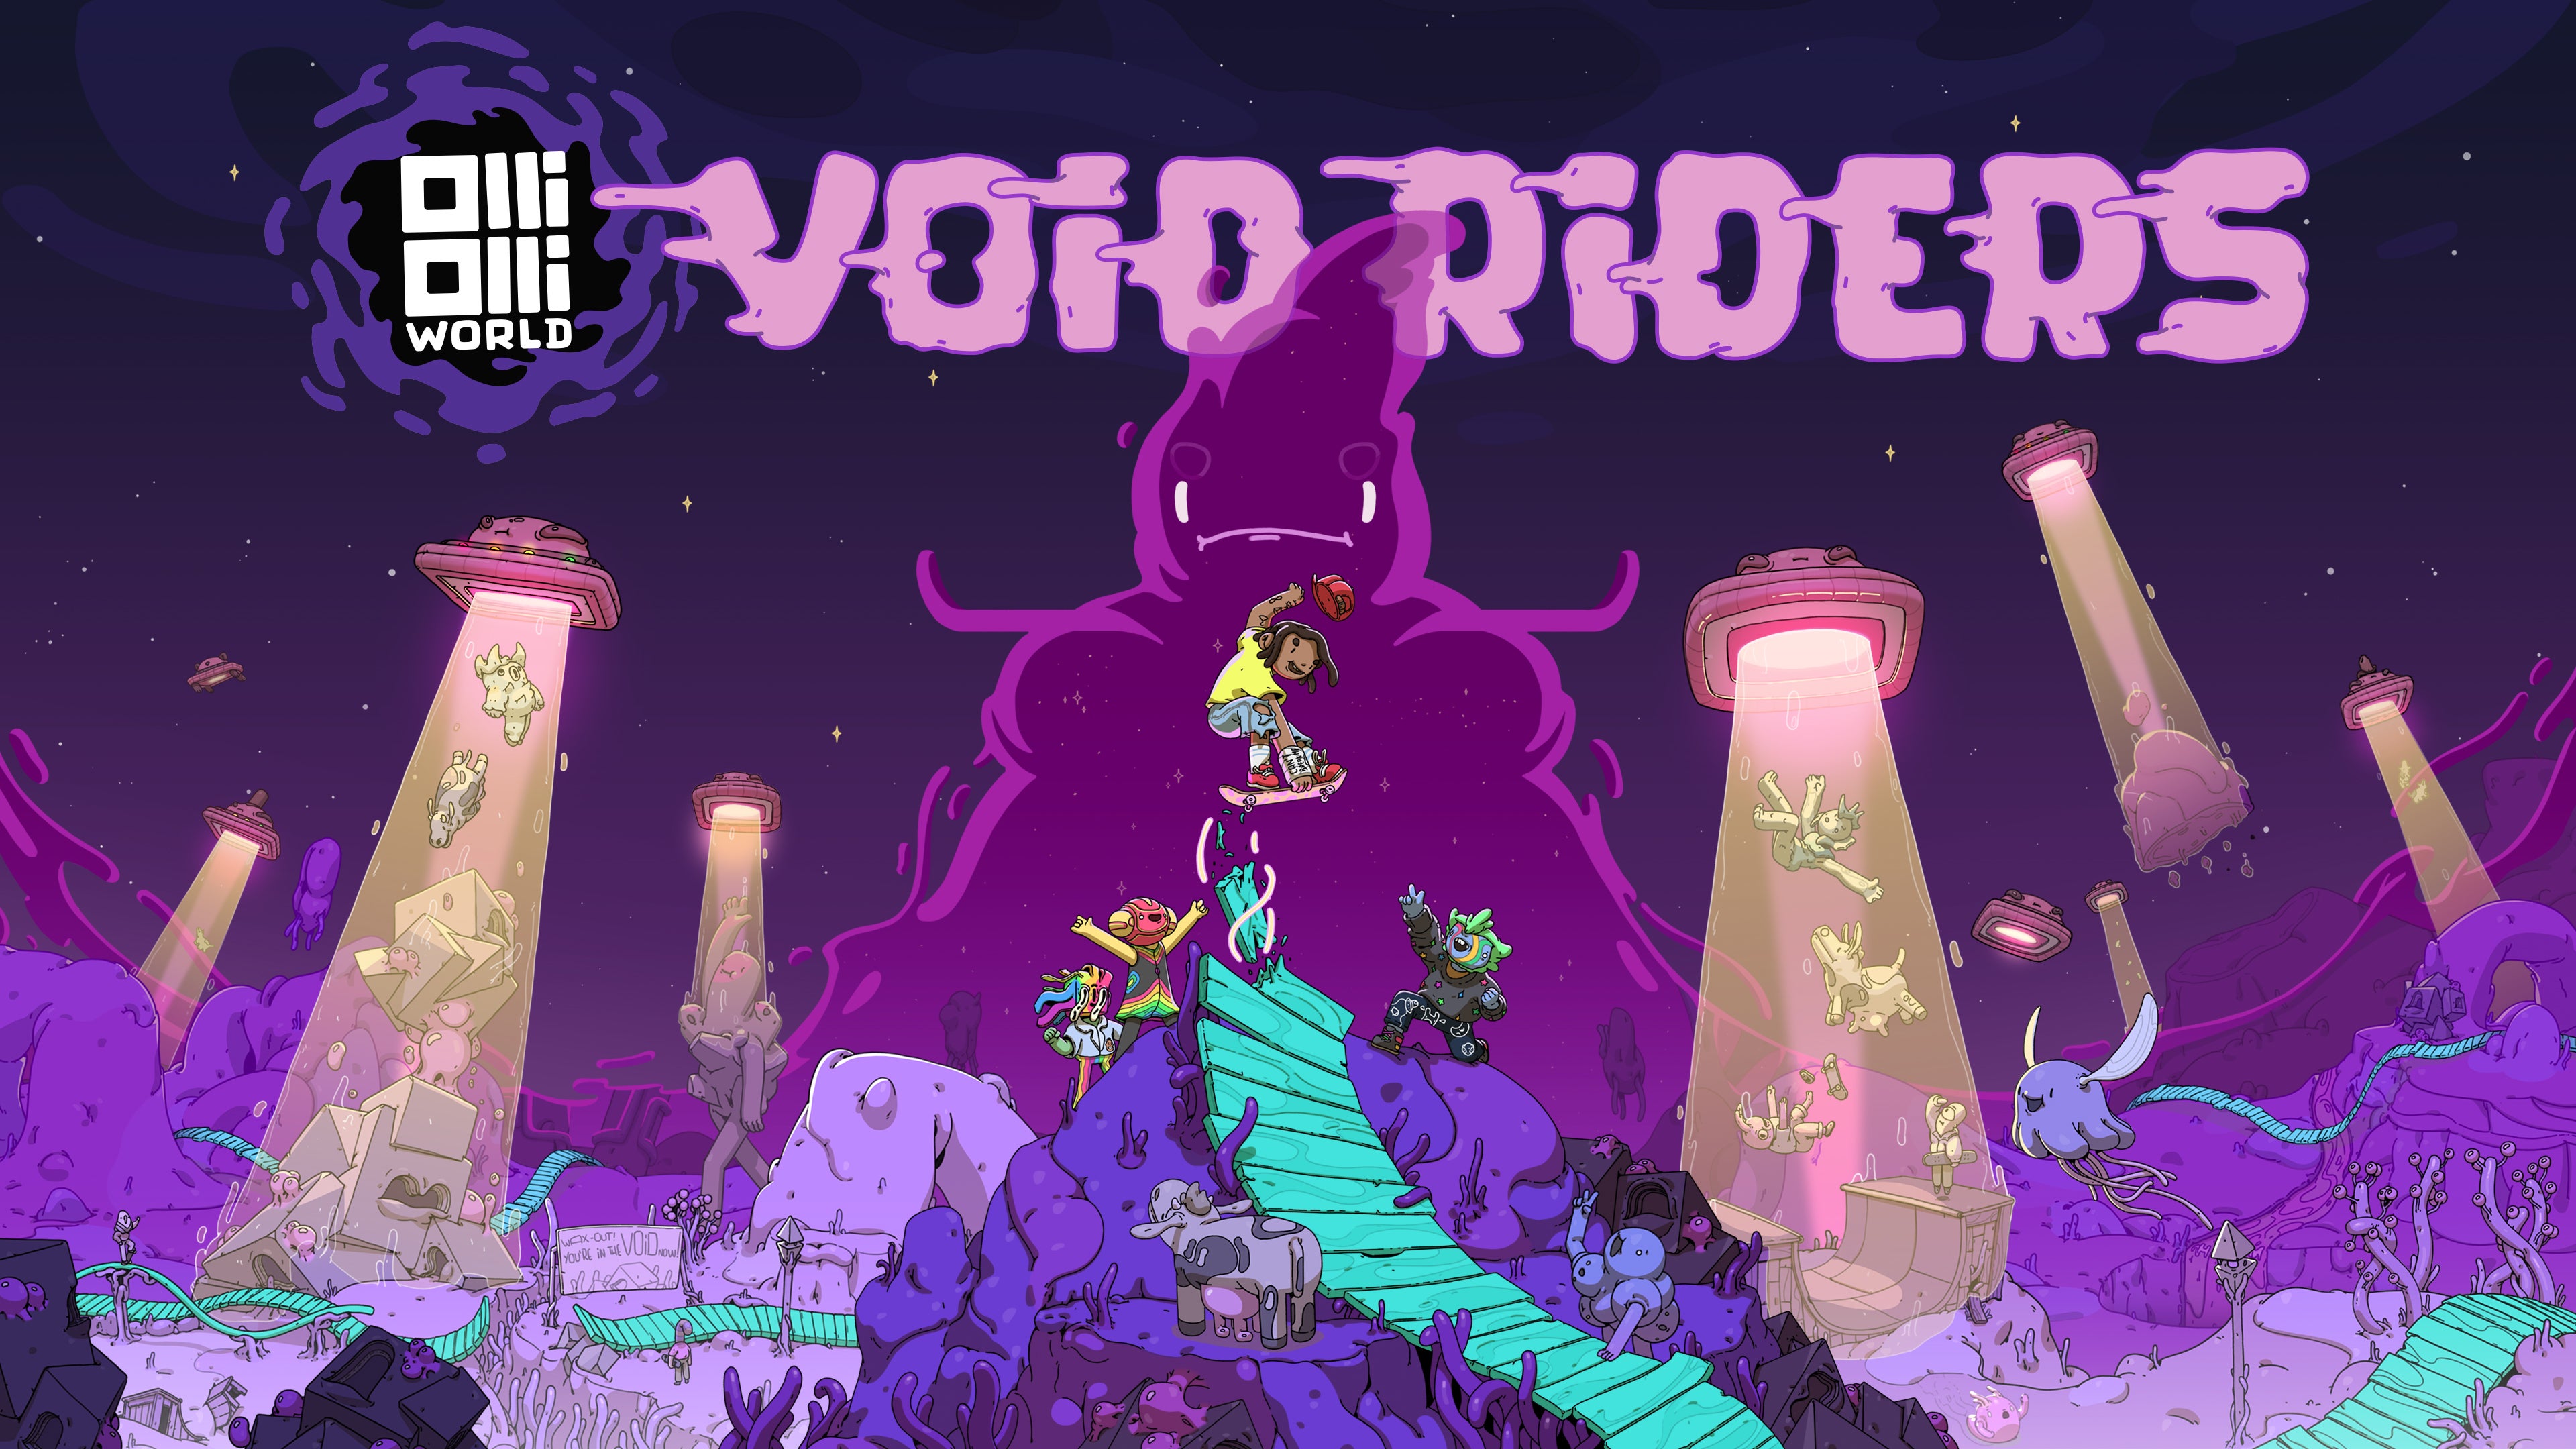 OlliOlli World's Void Riders expansion puts an extraterrestrial twist on one of 2022's finest